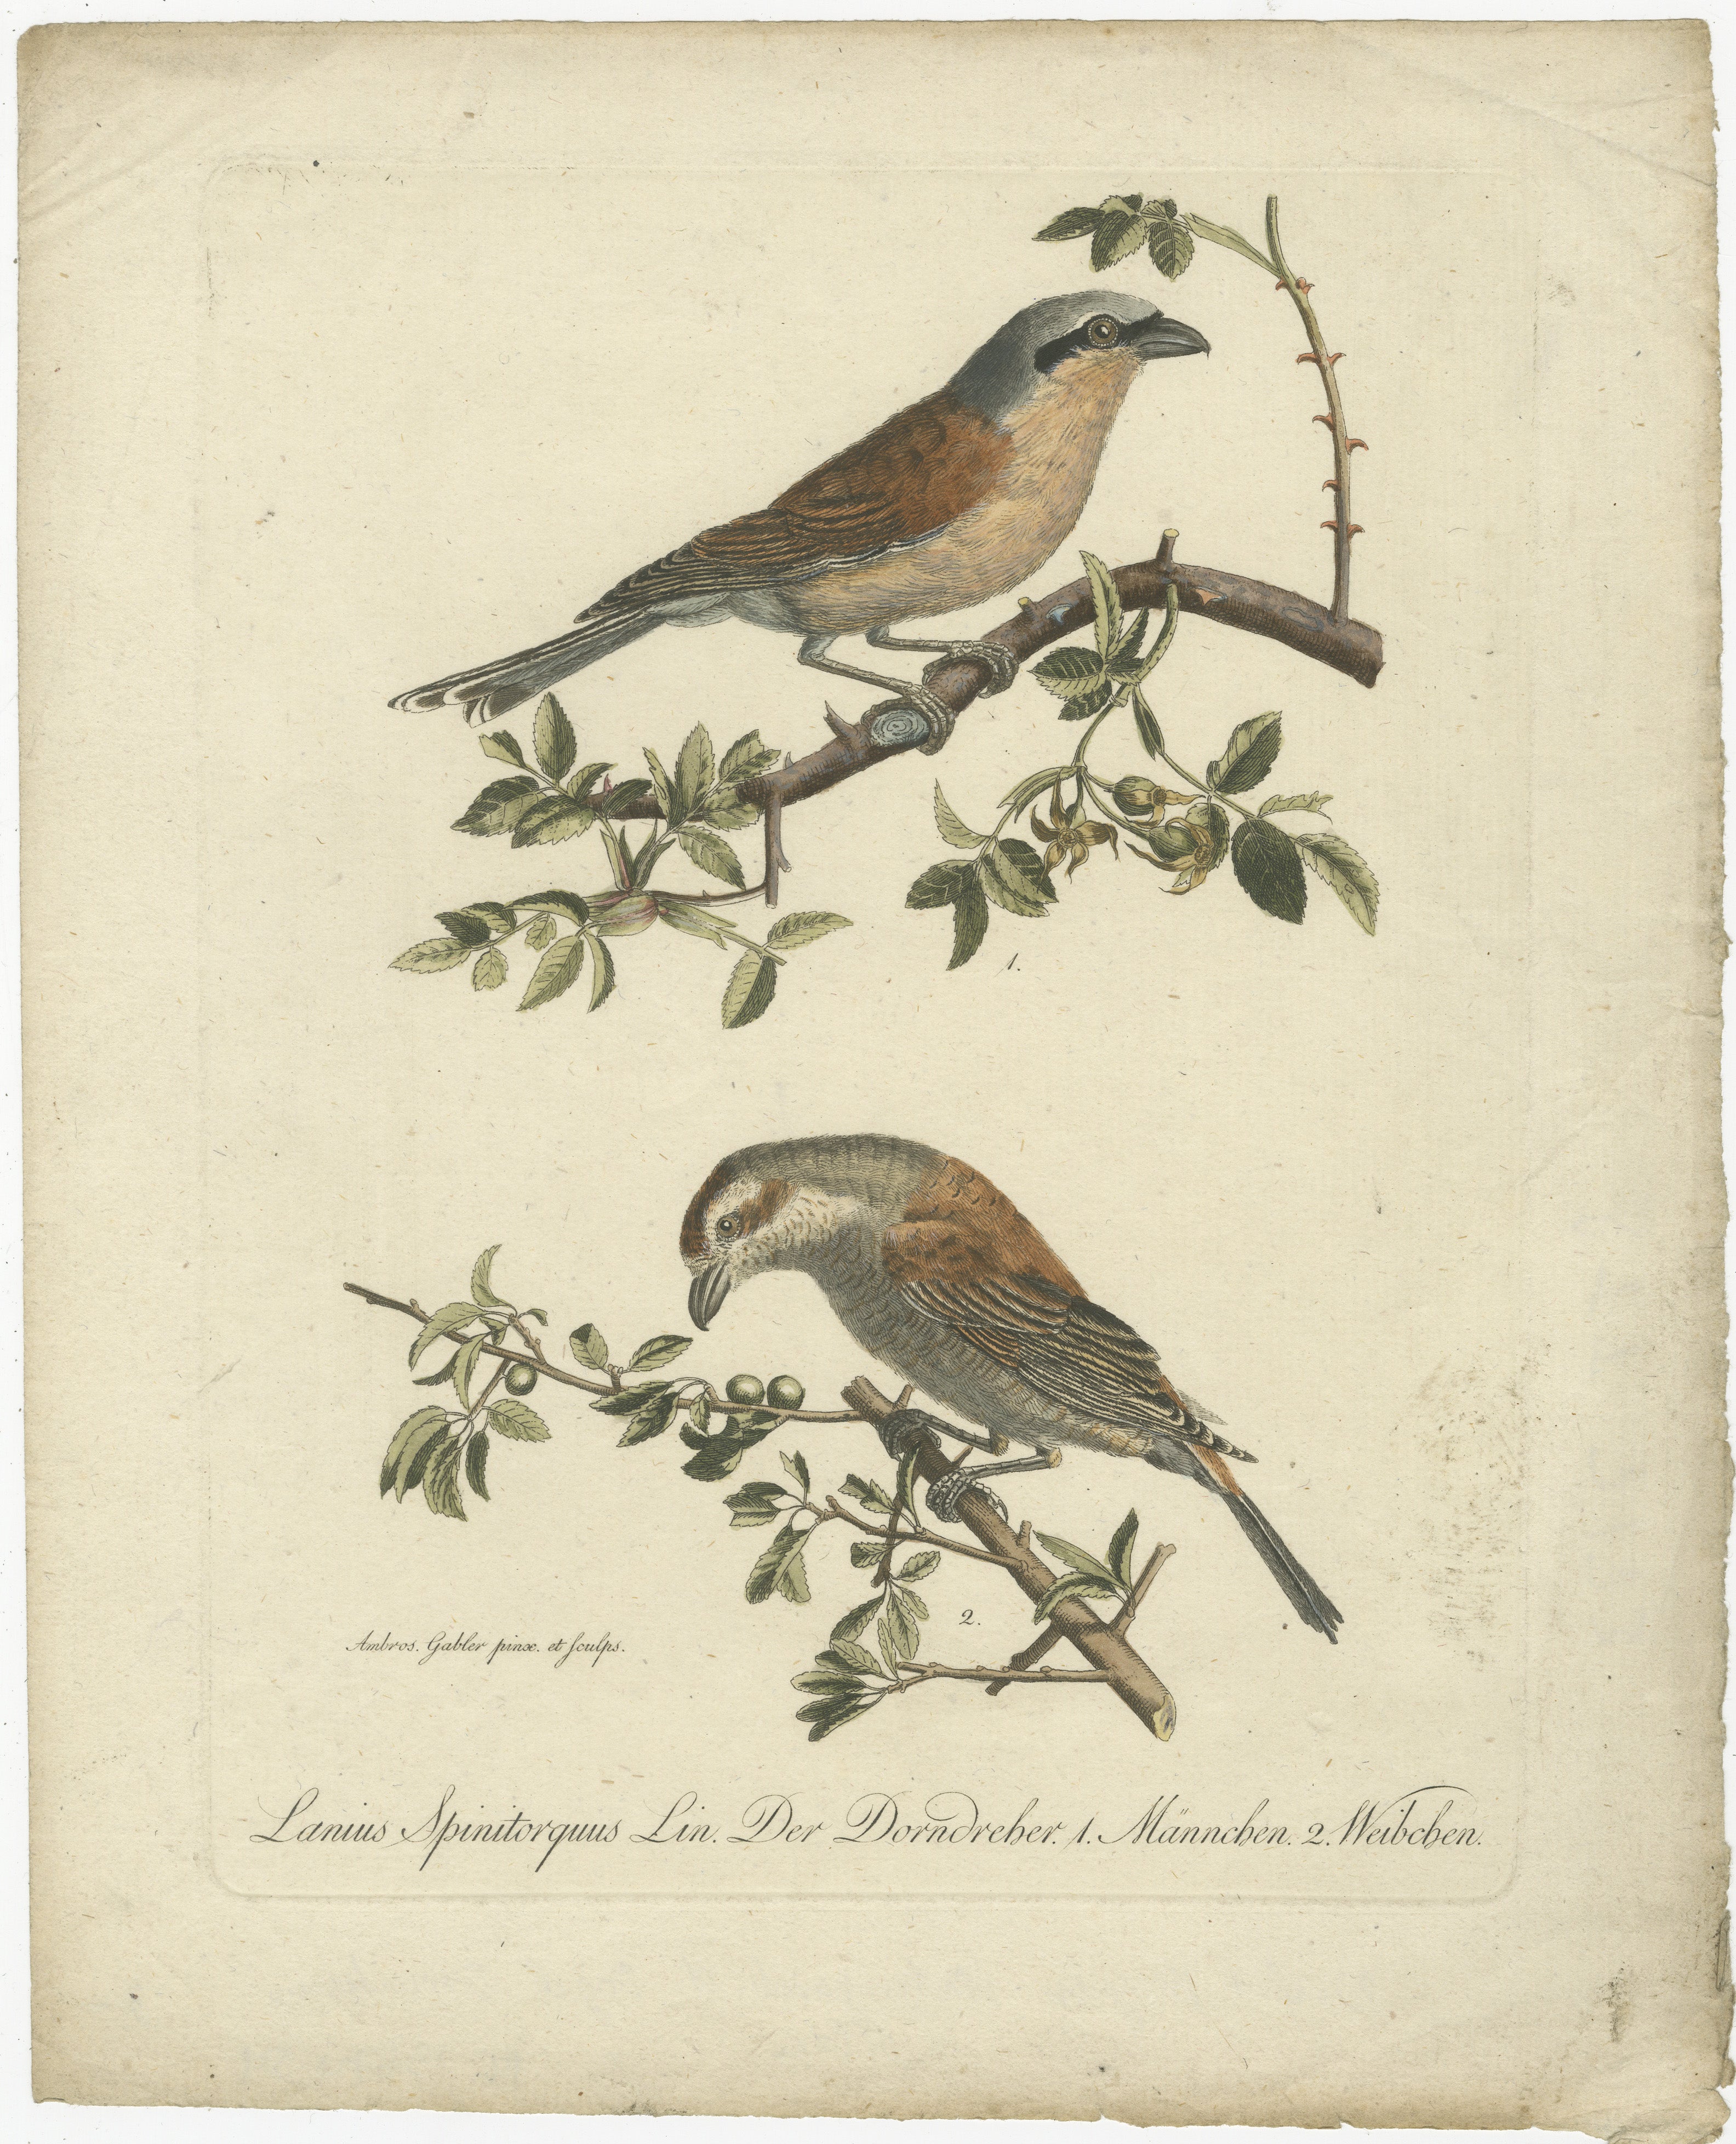 This illustration depicts two shrikes, specifically identified as 